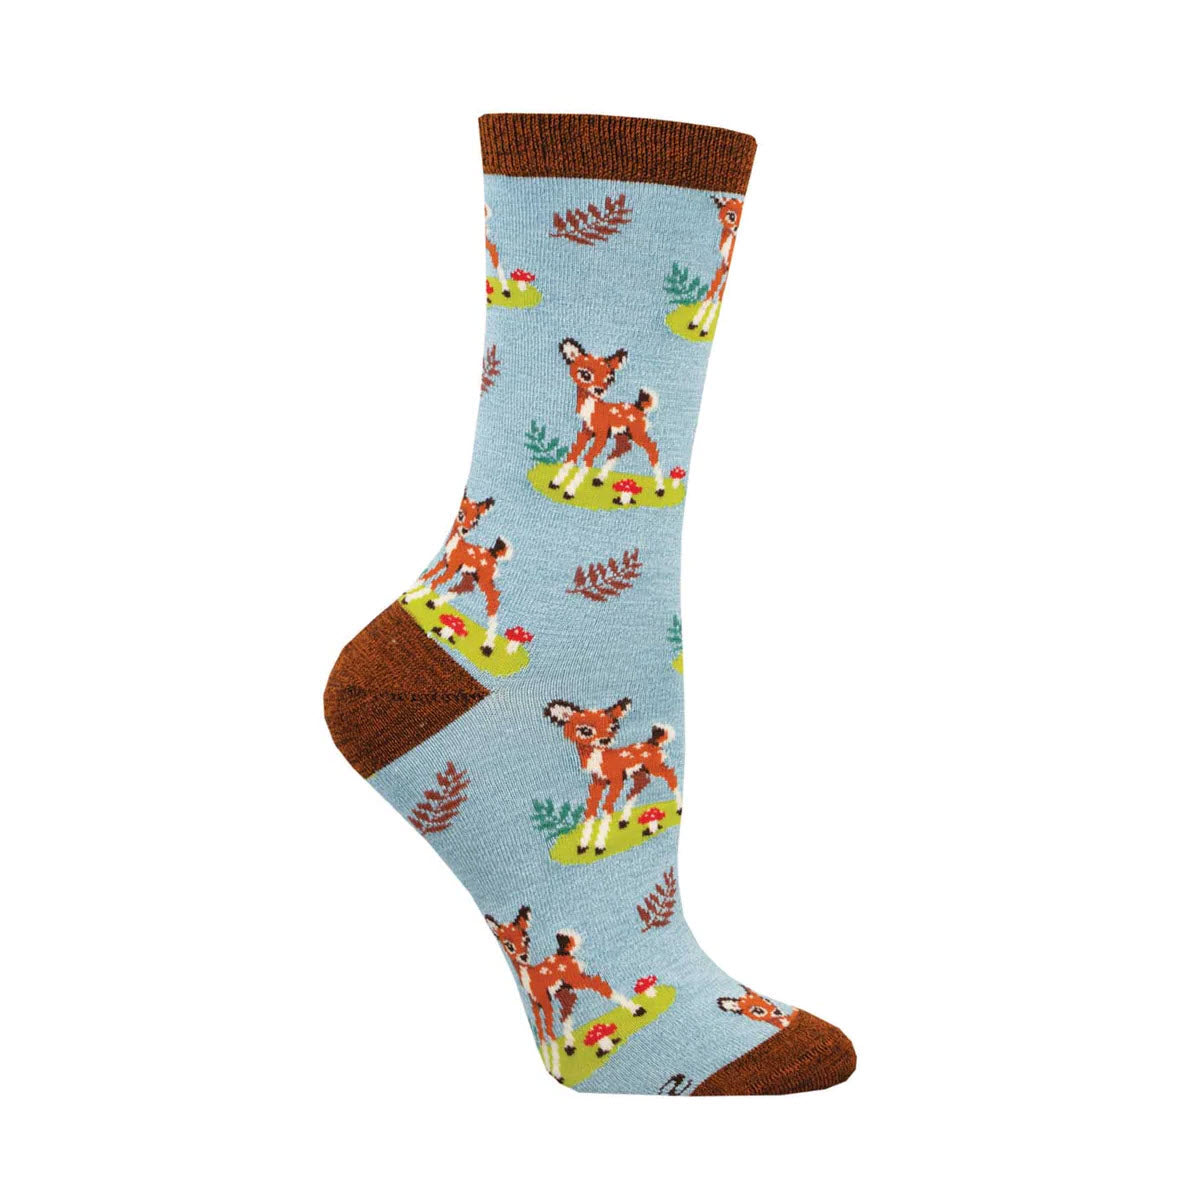 A single Socksmith Bamboo Crew sock in &quot;Oh Deer Blue&quot; with a pattern of small deer and yellow ducks frolicking, featuring brown heel, toe, and cuff.